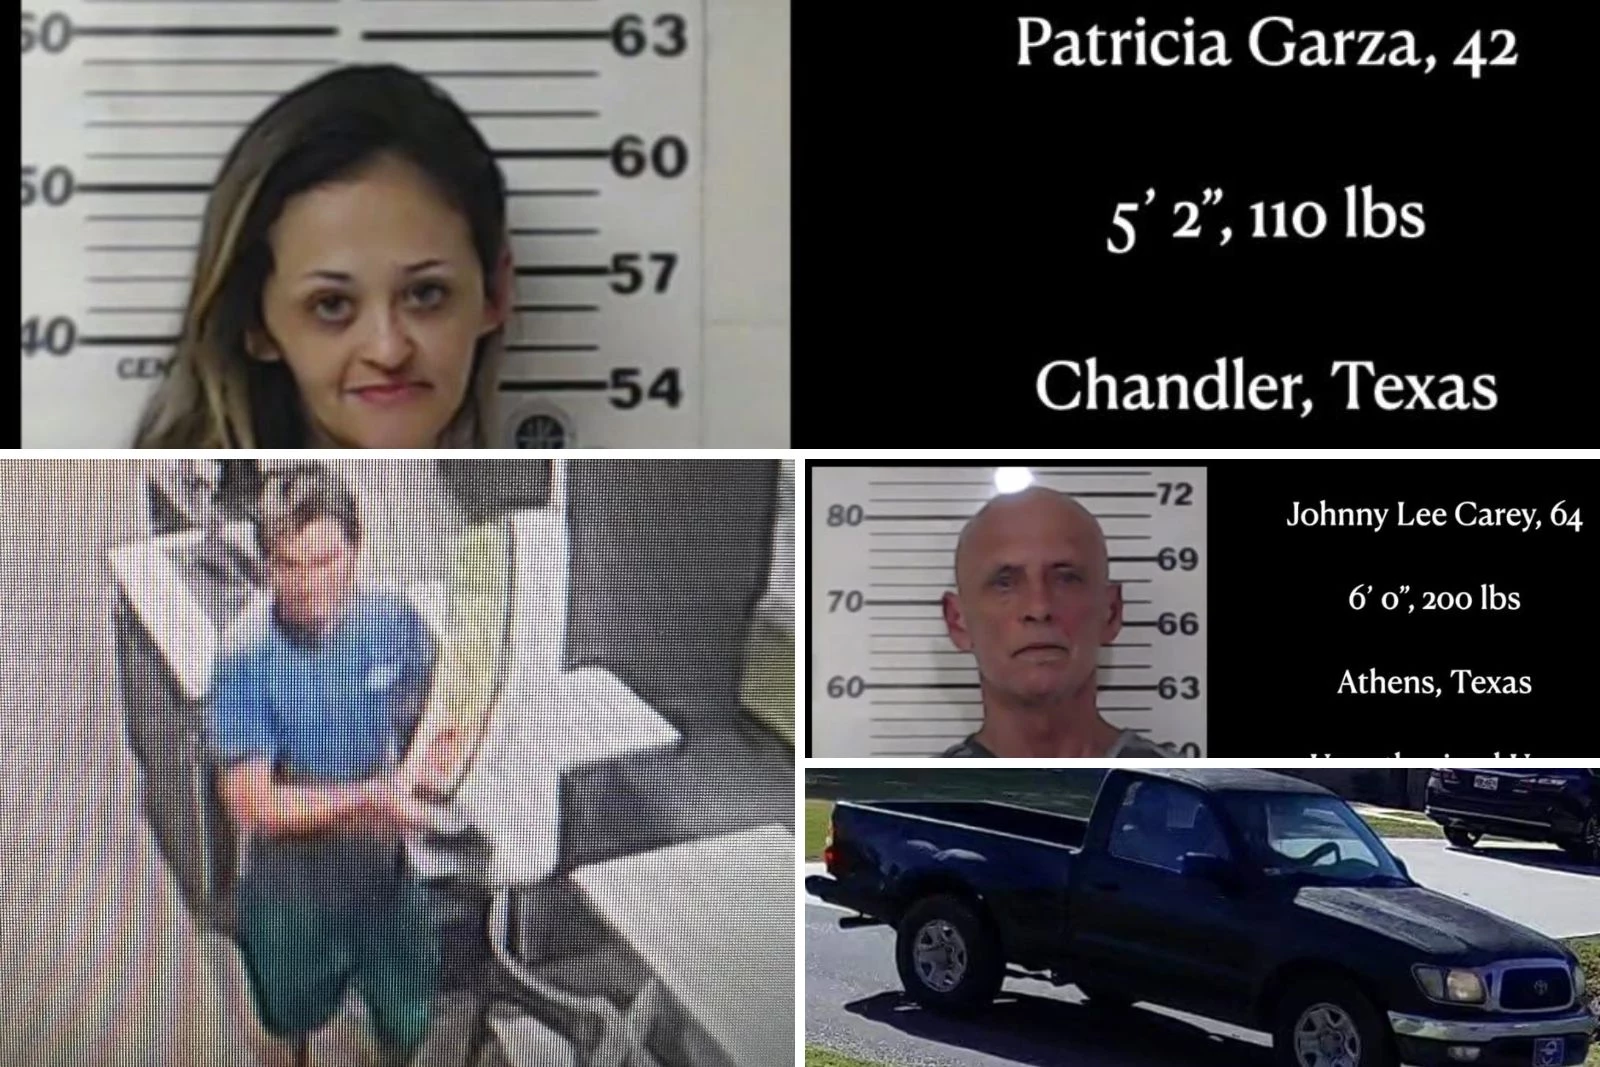 They're Evading East Texas Authorities, But We Can Help Find Them